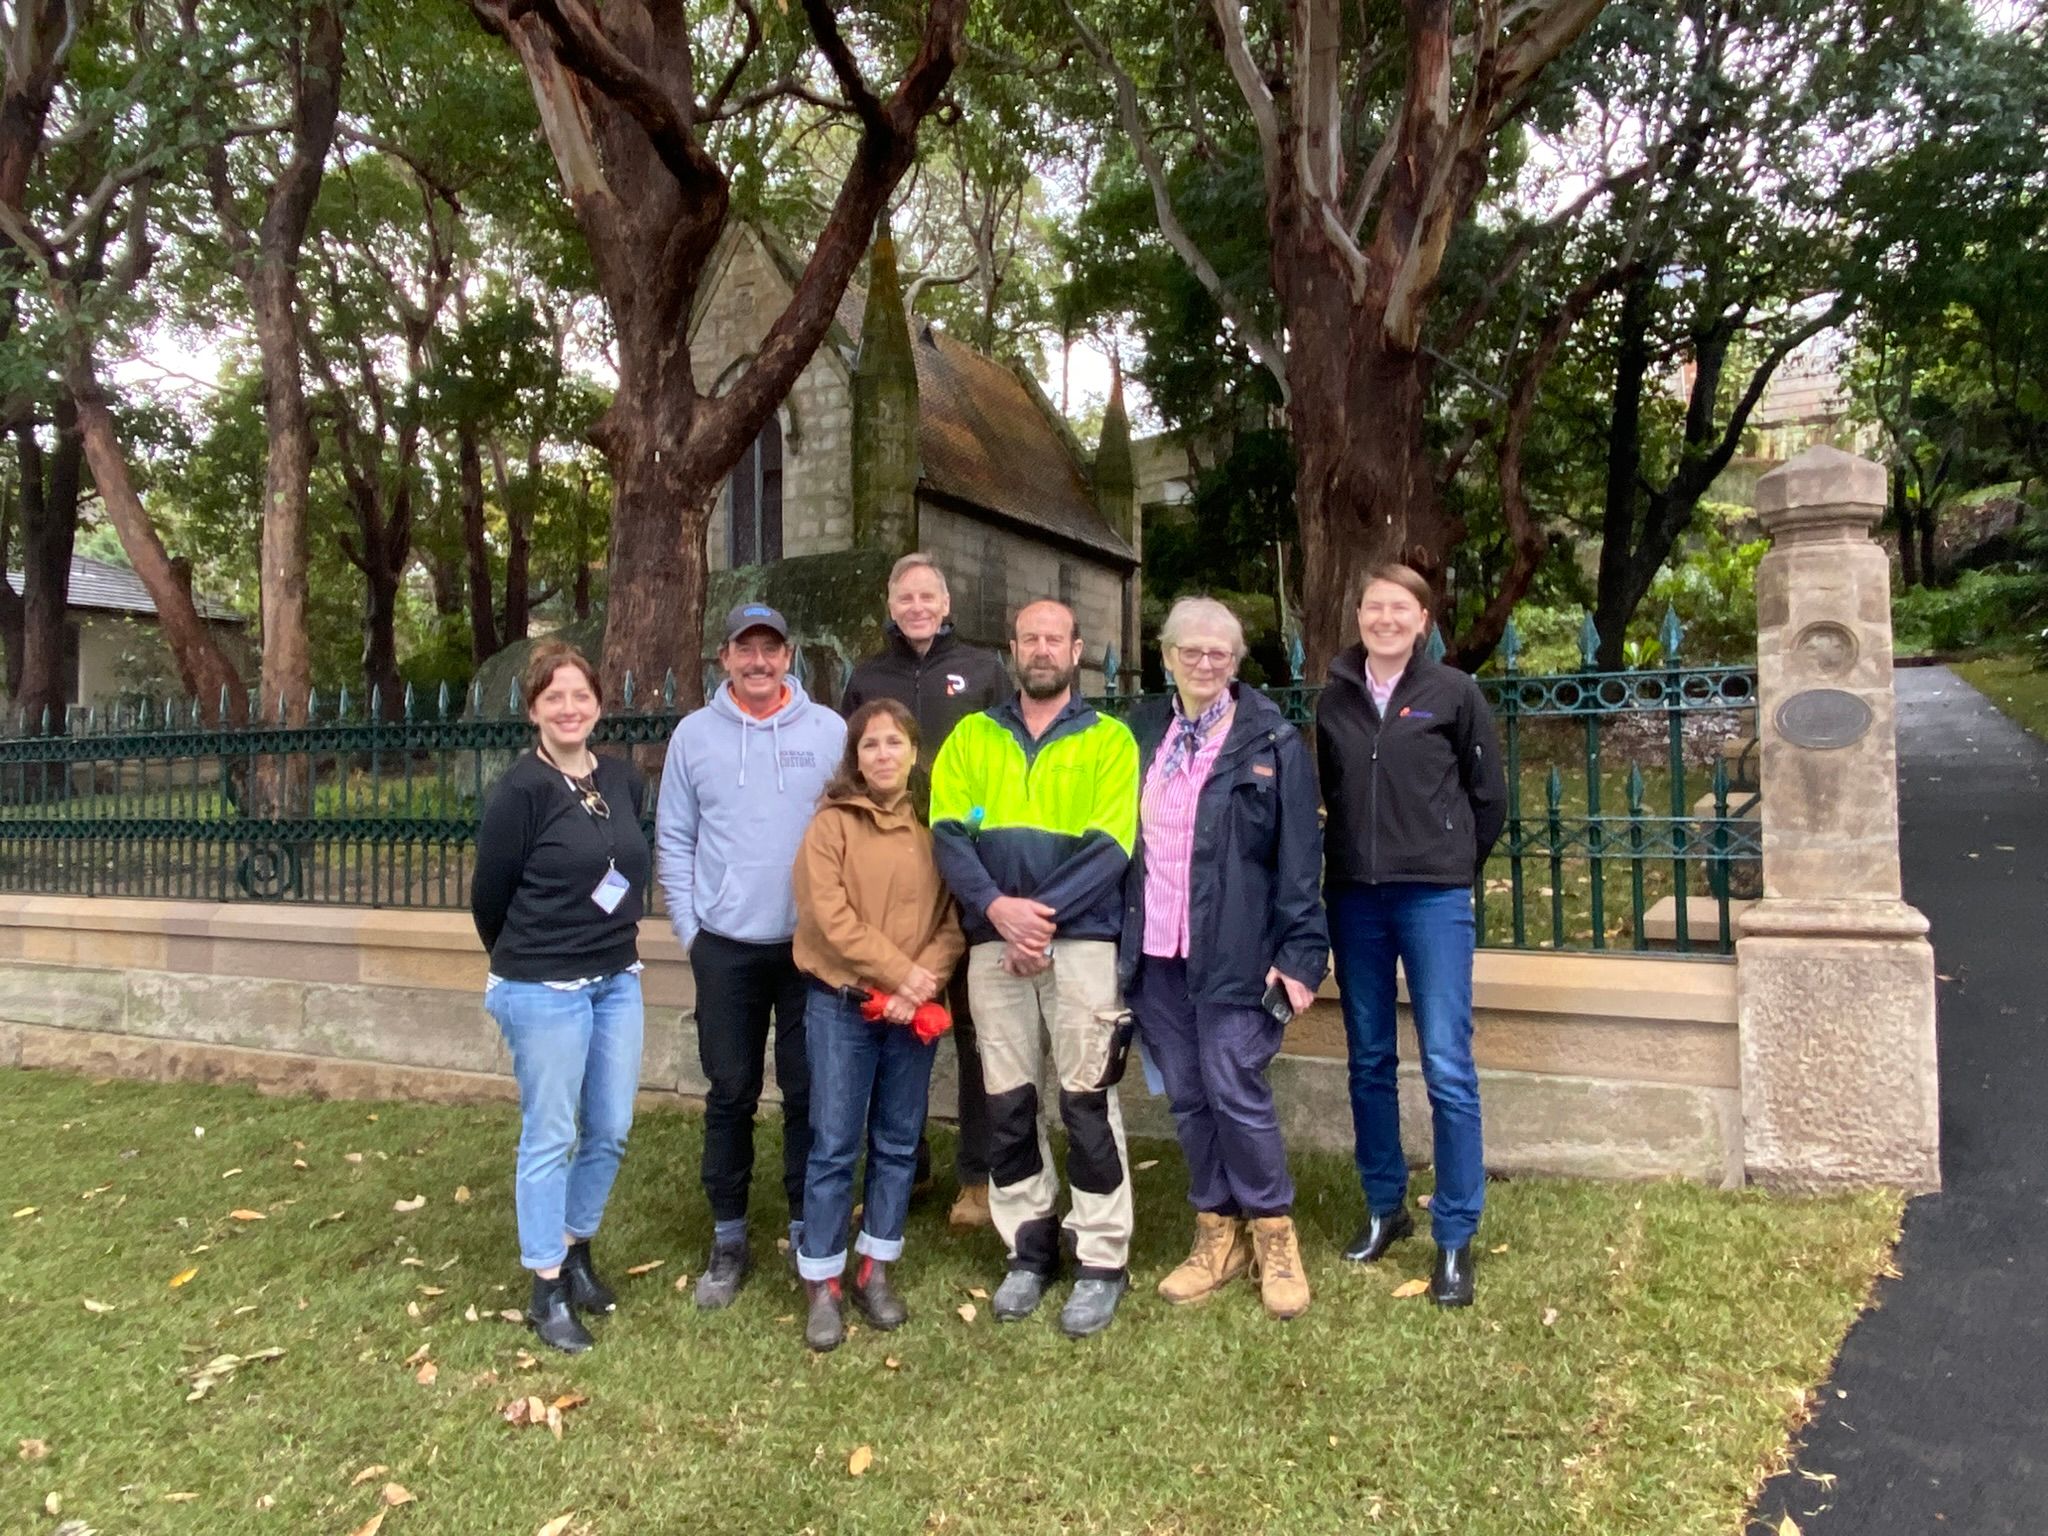 The team responsible for the restoration of the Wentworth Mausoleum perimeter fence